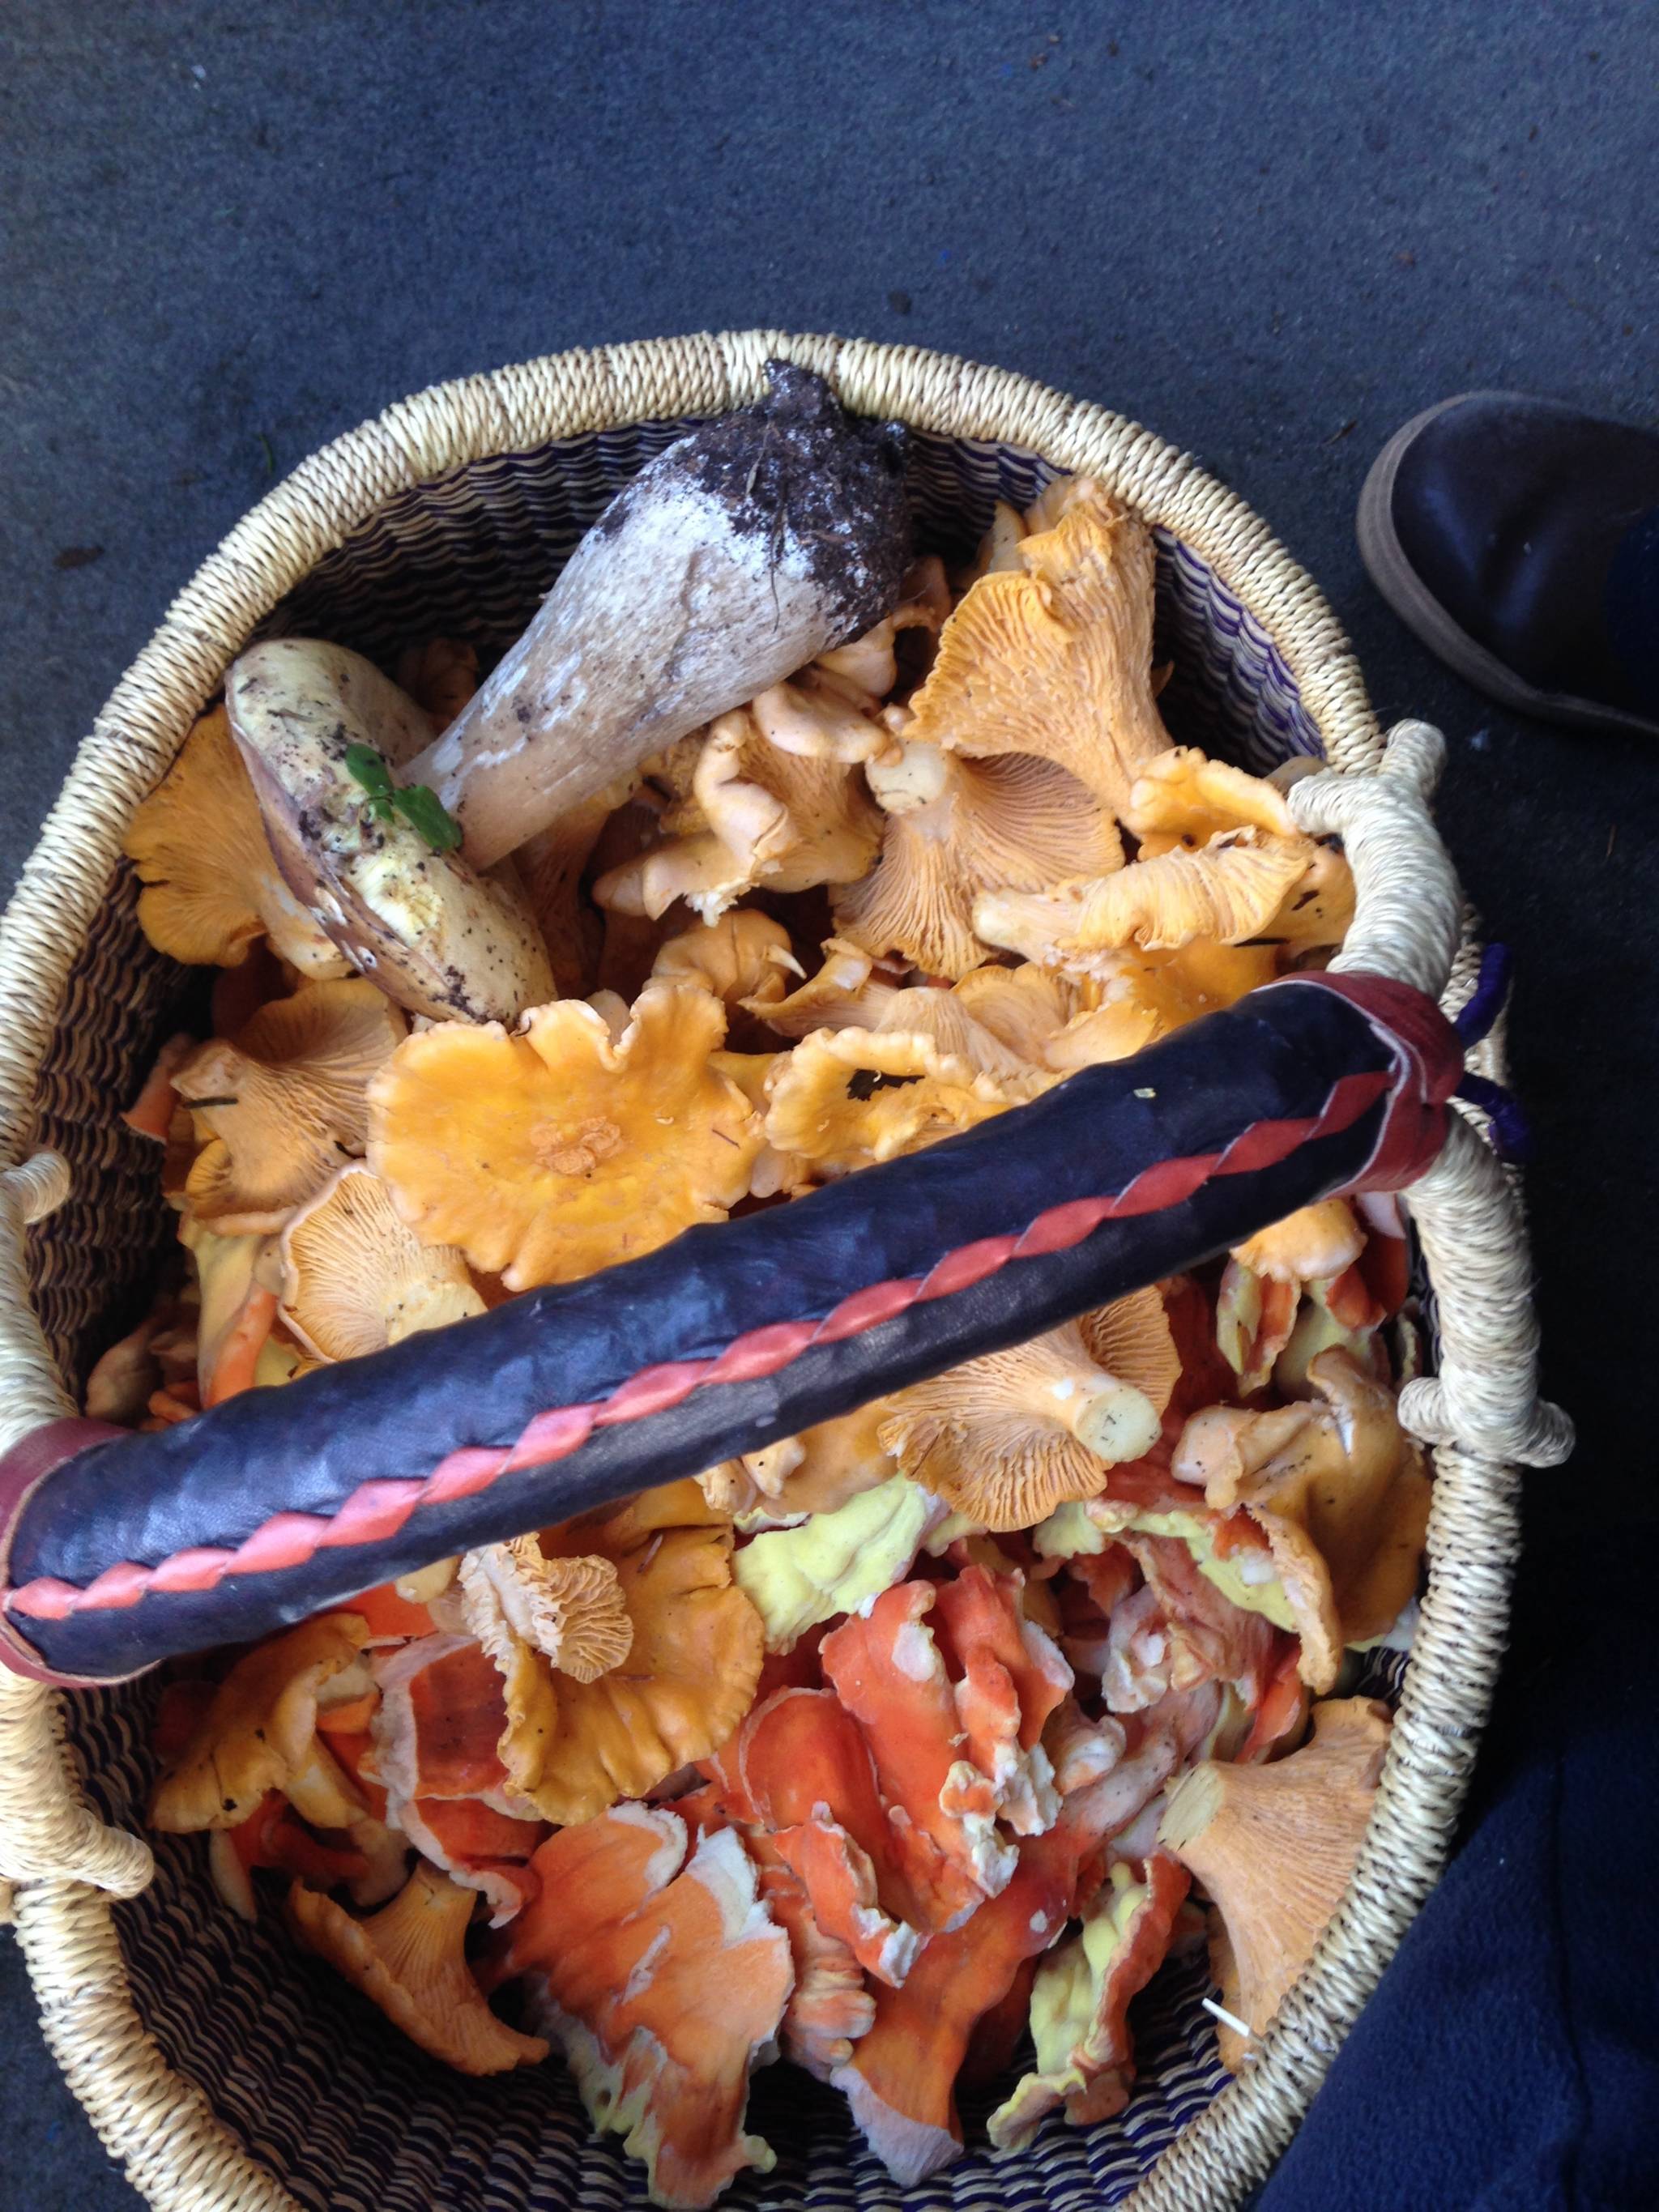 A basketful of fungi including a bolete, Pacific golden chanterelles, hedgehogs, and chicken of the woods. Photo by Corinne Conlon.